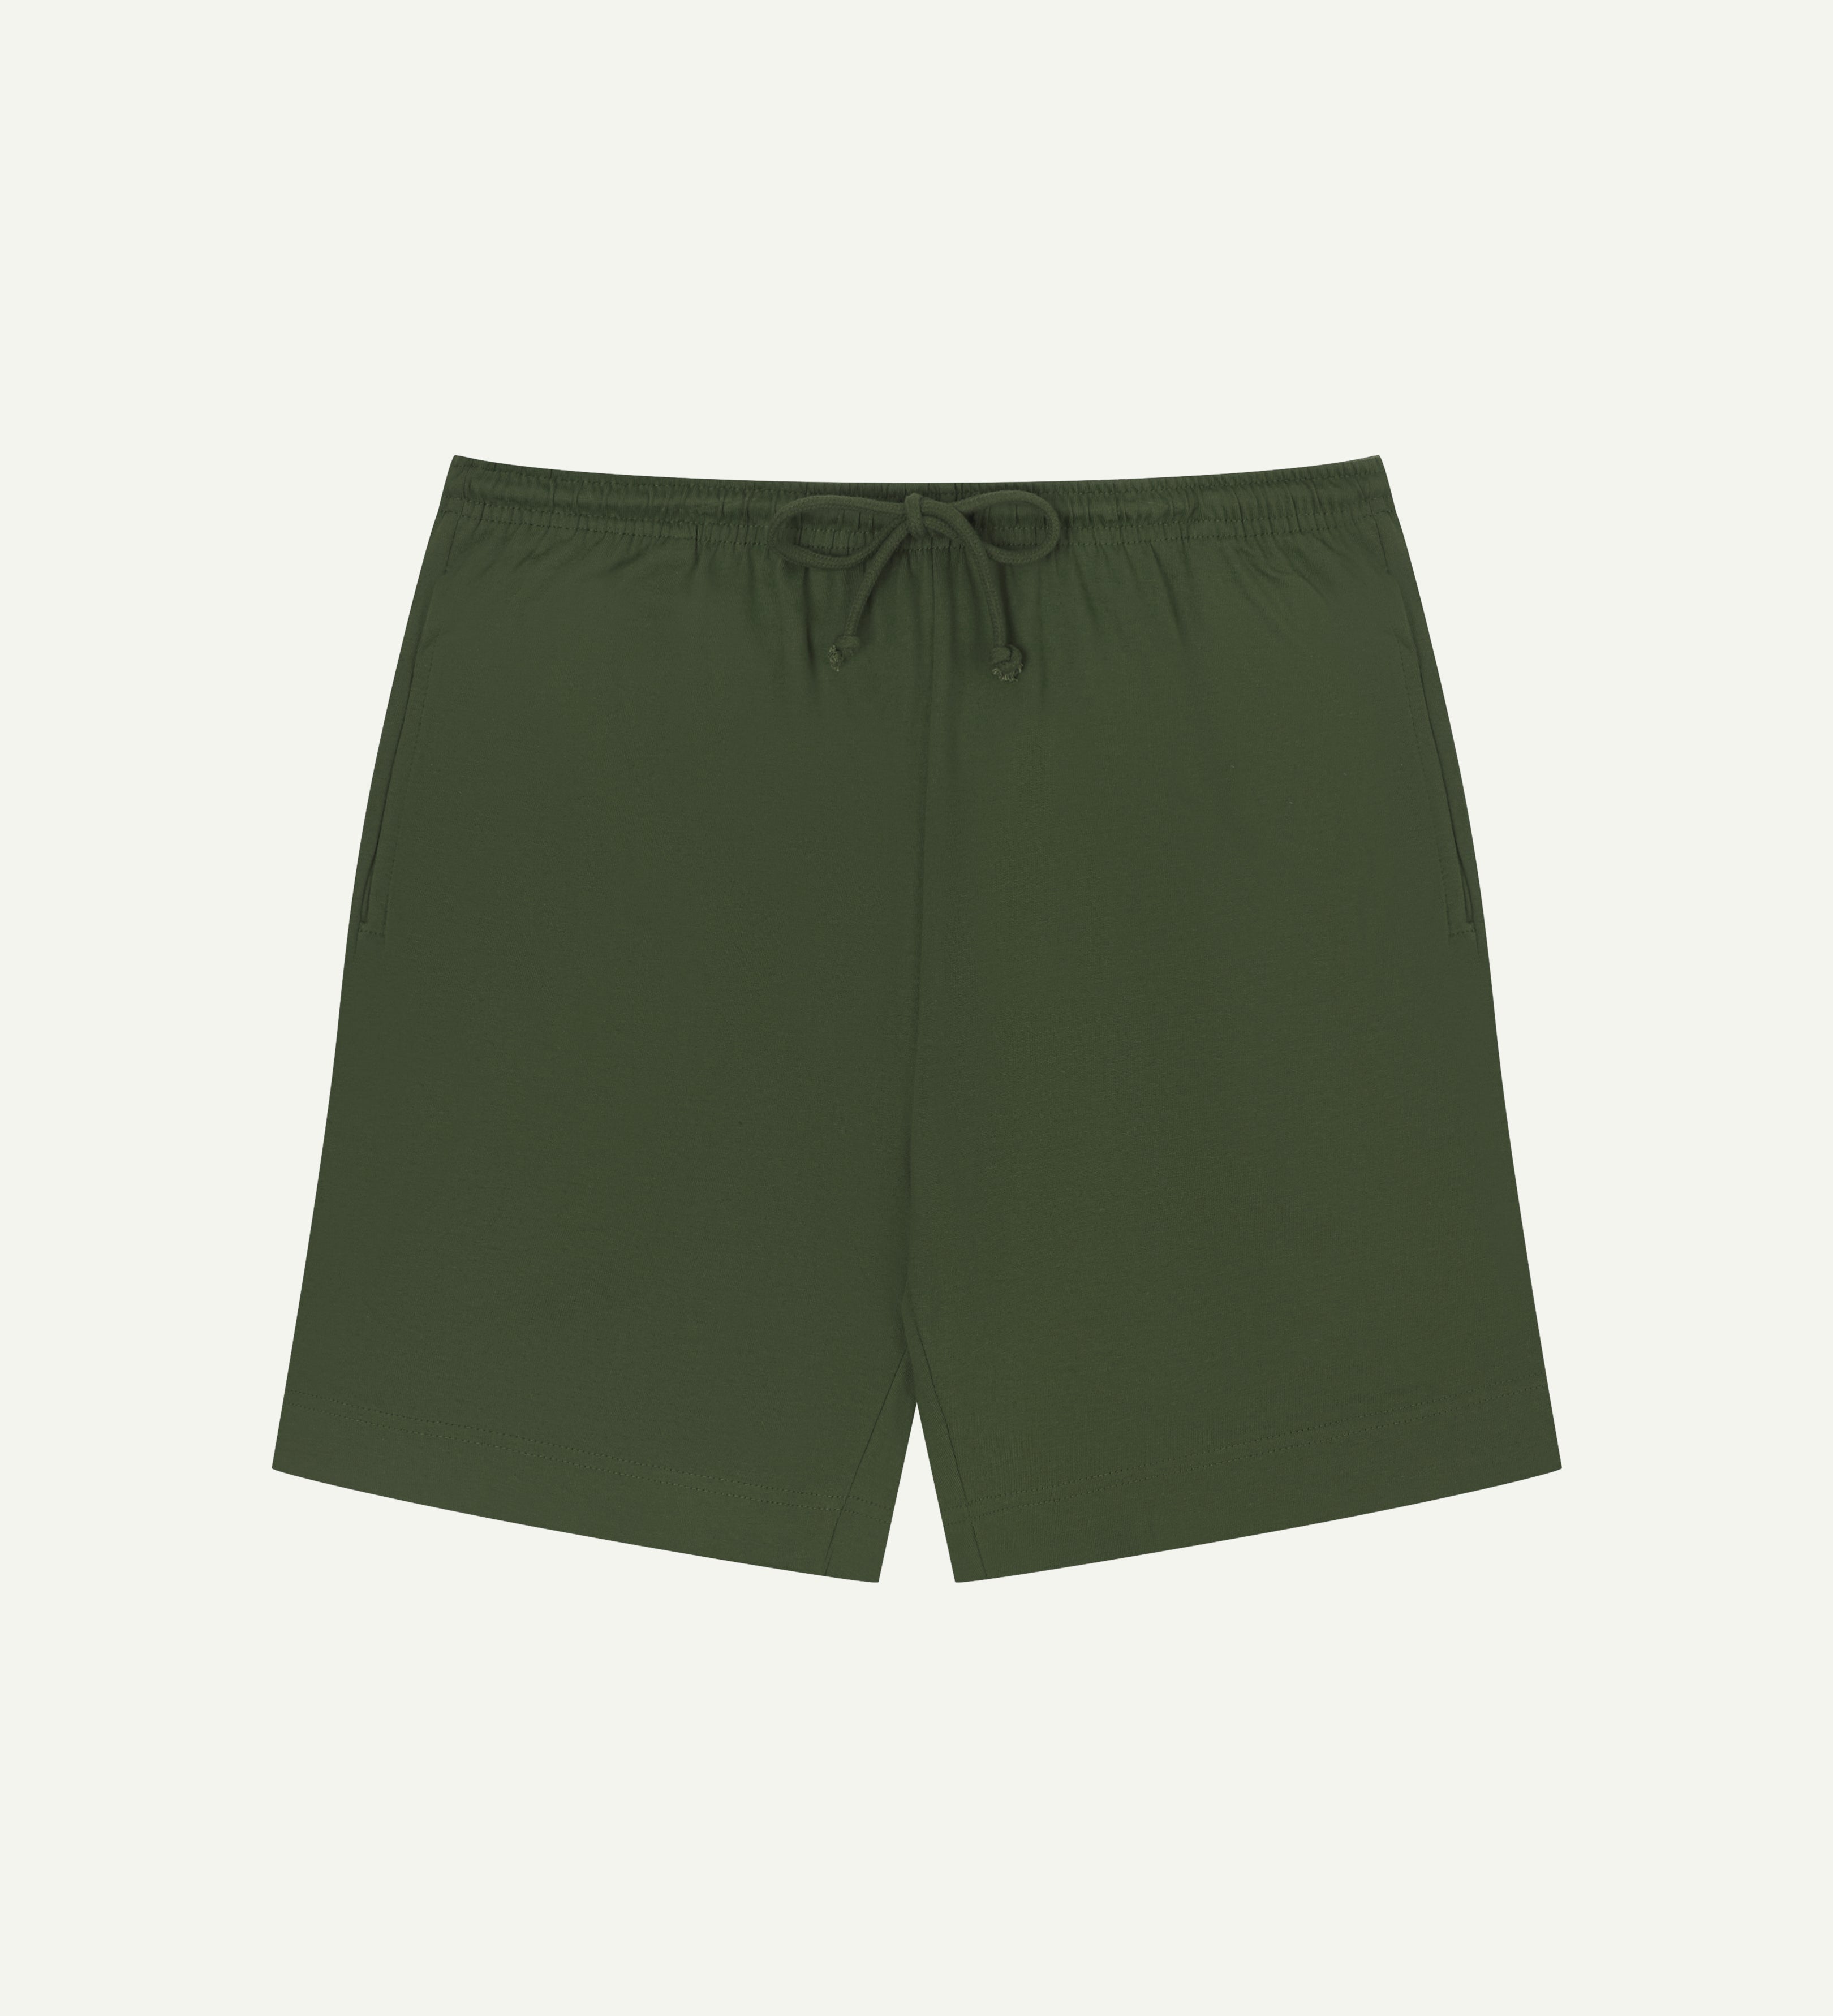 Front view of mid-green organic cotton #7007 jersey shorts by Uskees against white background. Clear view of drawstring waist.